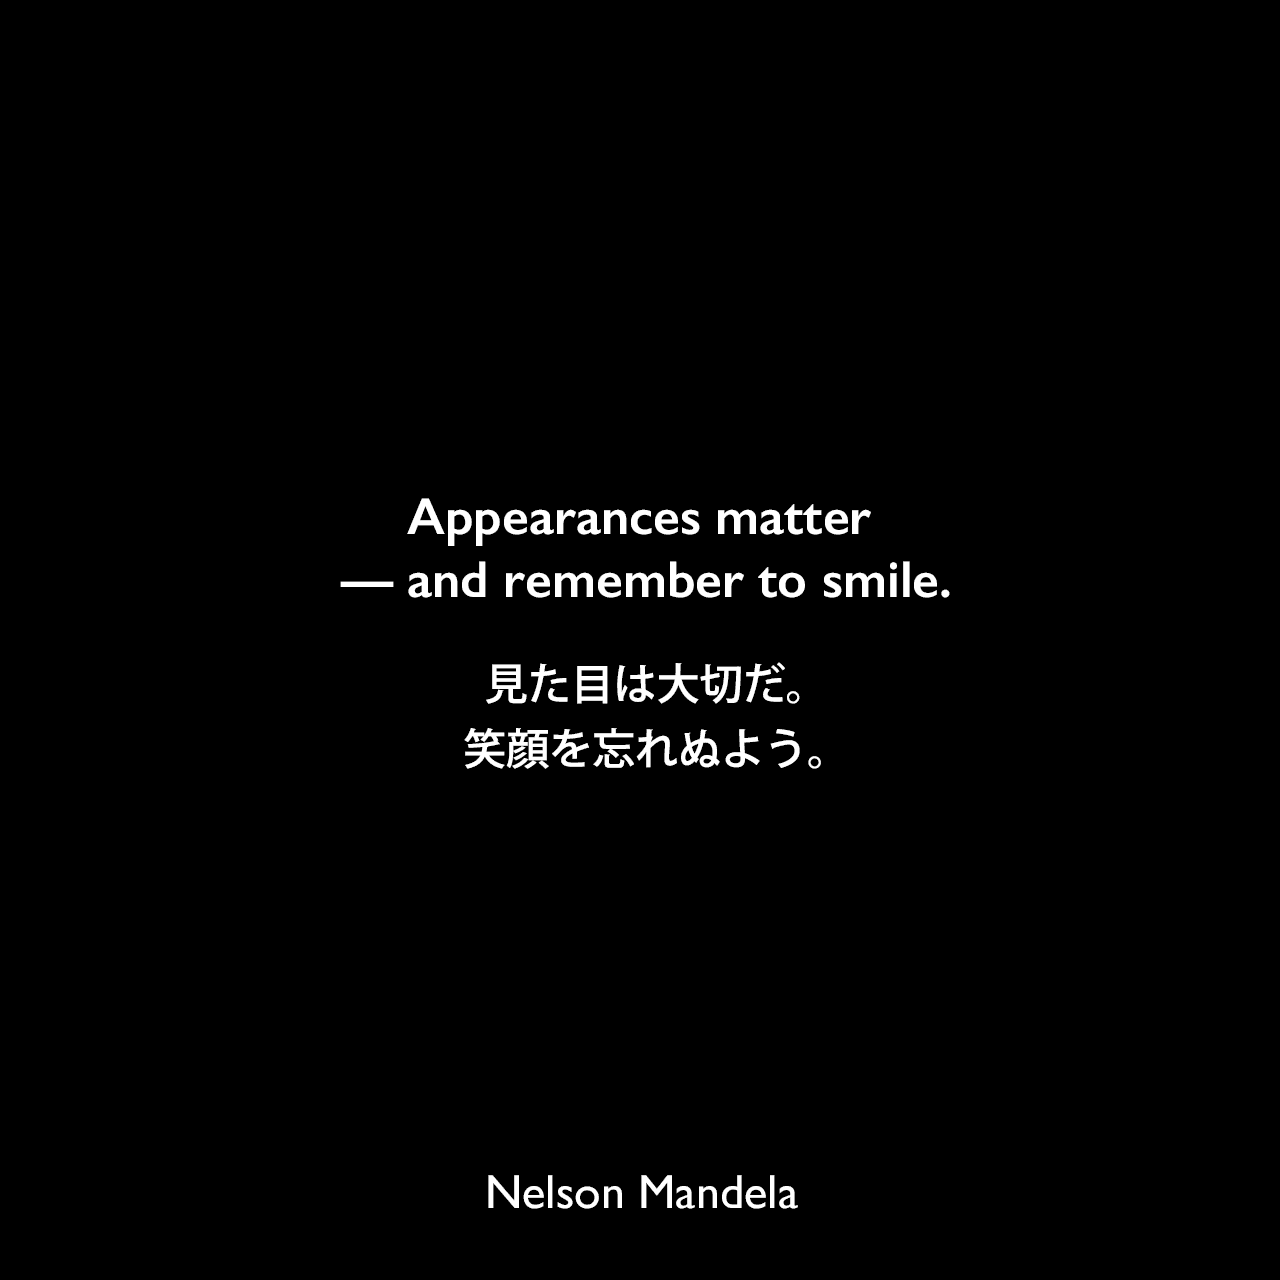 Appearances matter — and remember to smile.見た目は大切だ。笑顔を忘れぬよう。Nelson Mandela